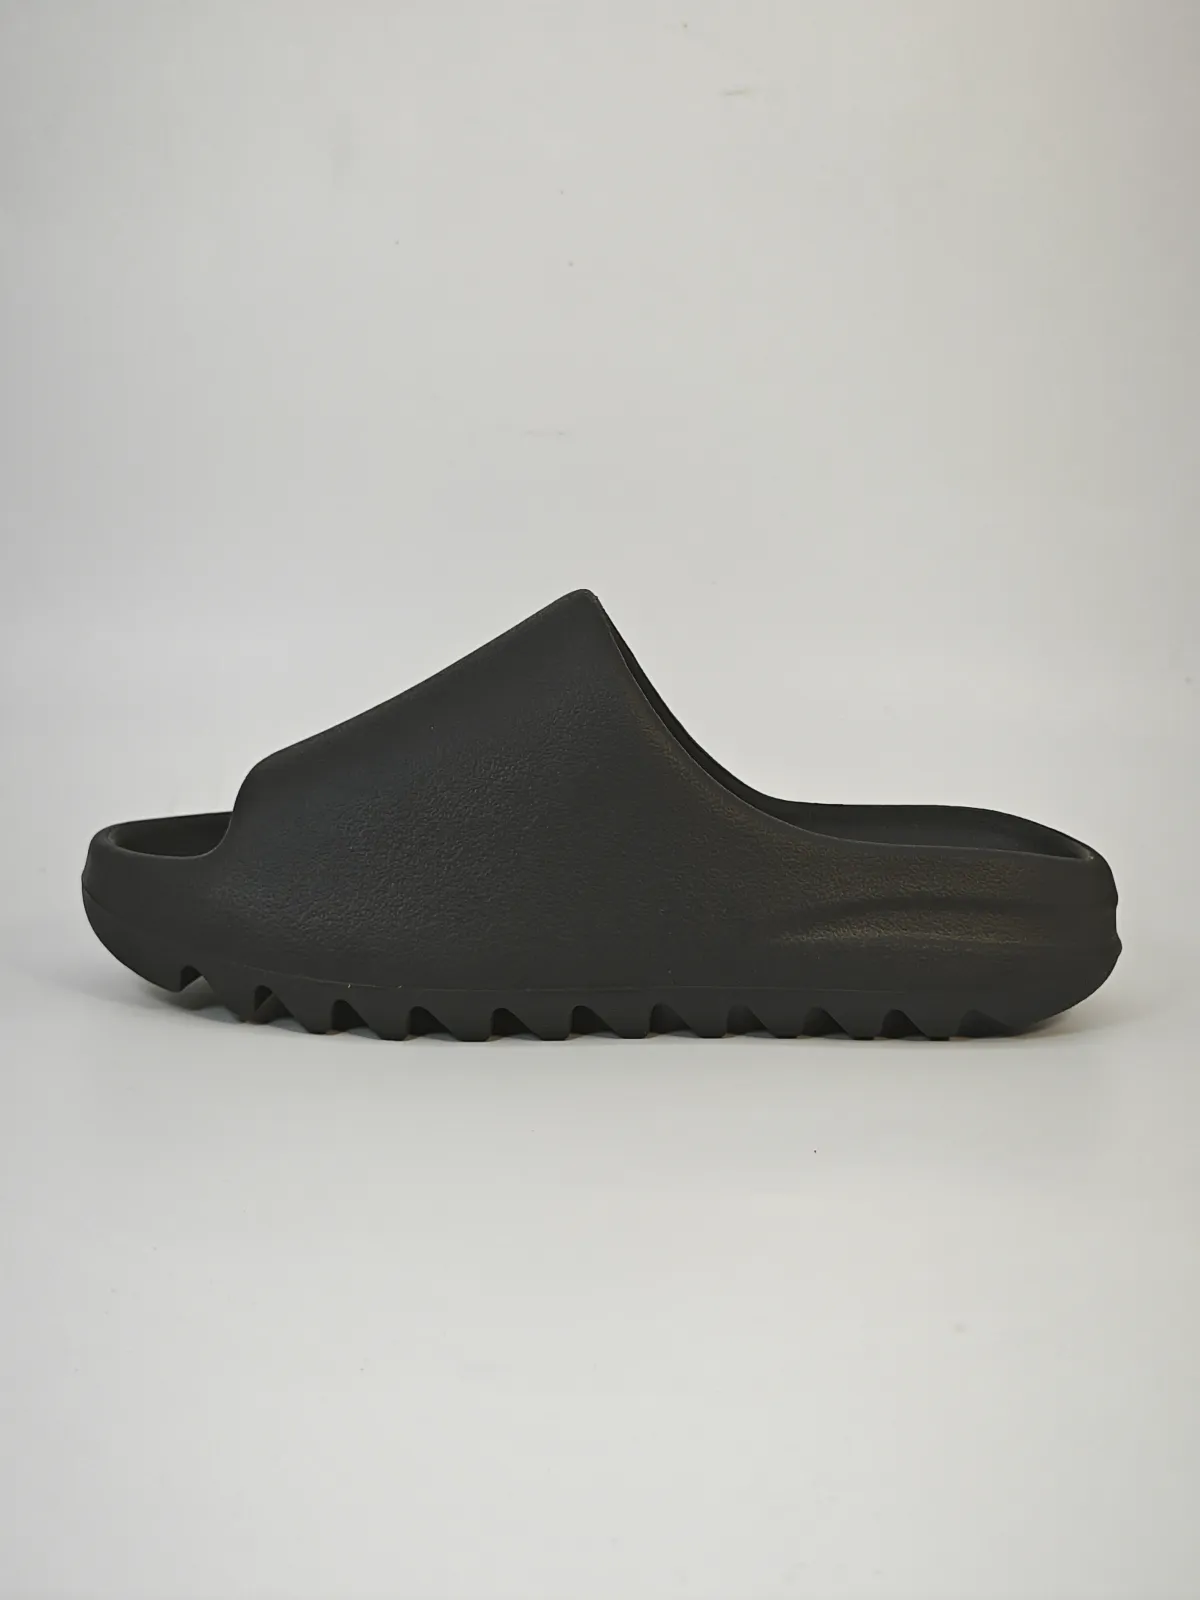 Review Best fake yeezy slides - fake yeezy slide onyx from stockx kicks, which offer best replica shoes